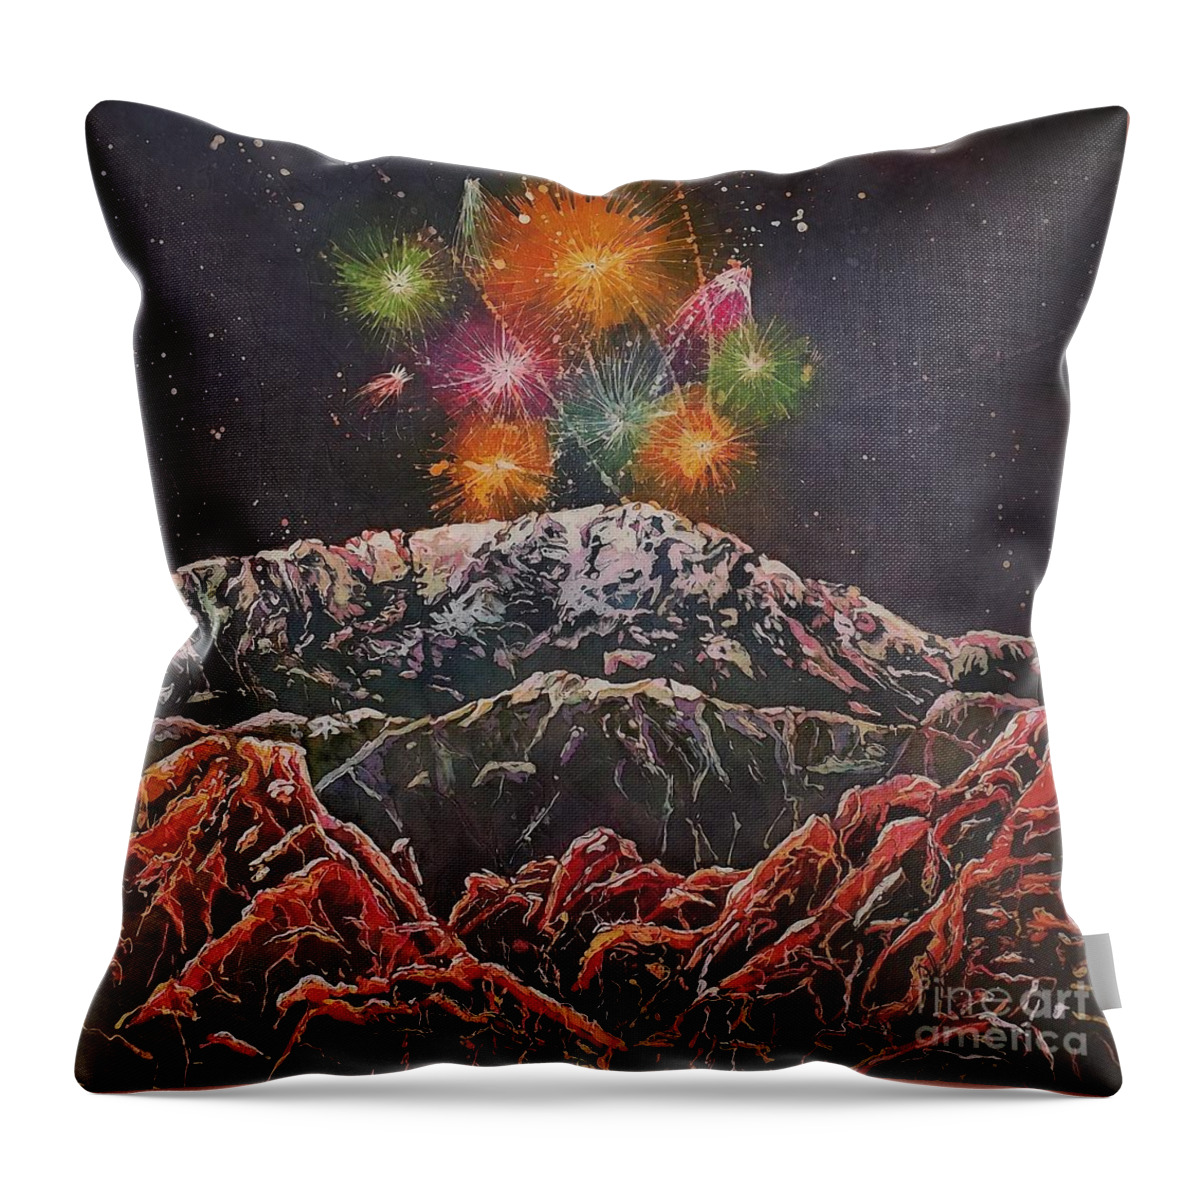 Fireworks Throw Pillow featuring the mixed media Happy New Year From America's Mountain by Carol Losinski Naylor